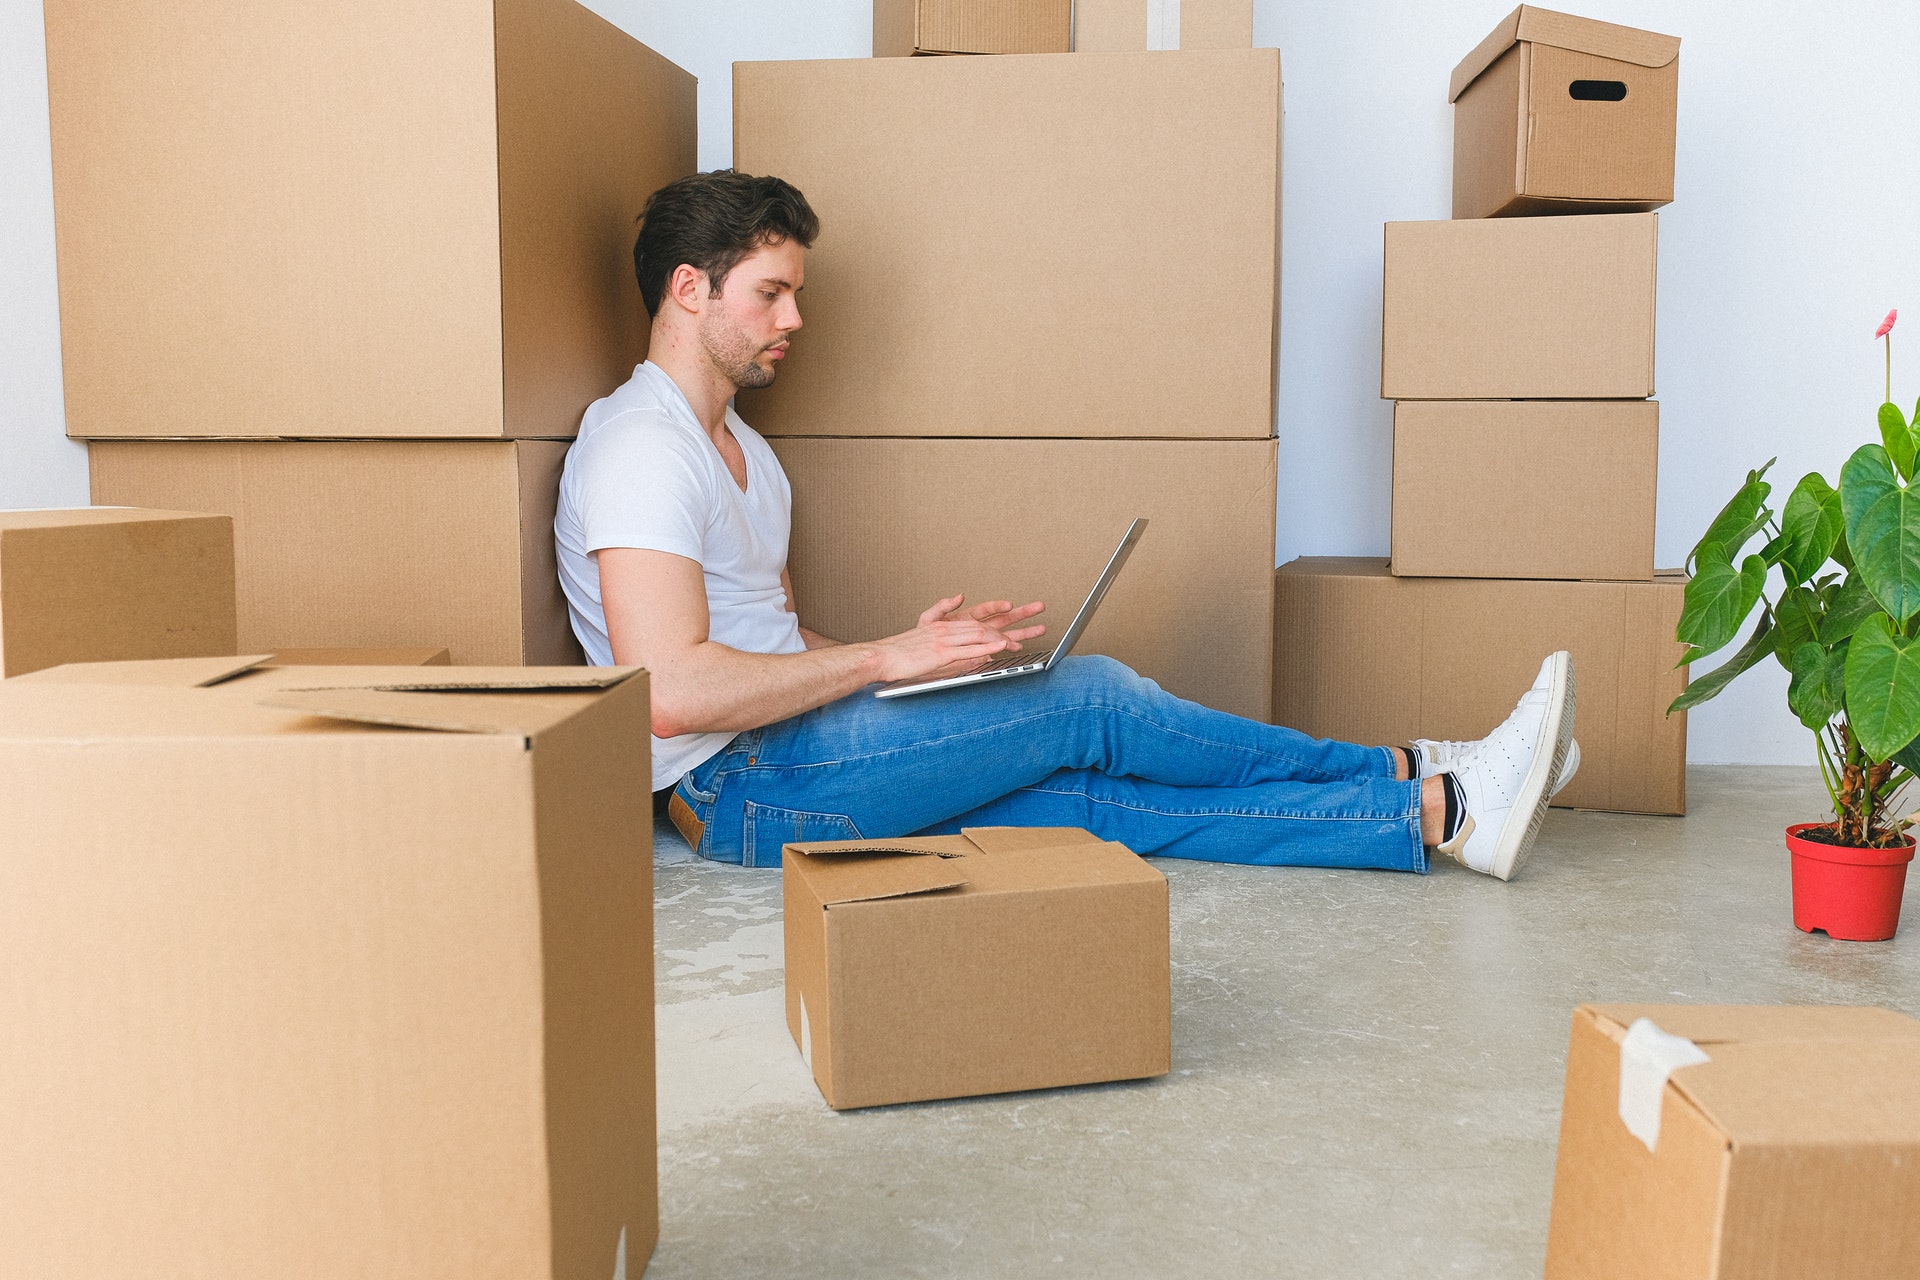 We can choose between a variety of cardboard and plastic boxes for moving, but which ones would fit the best?